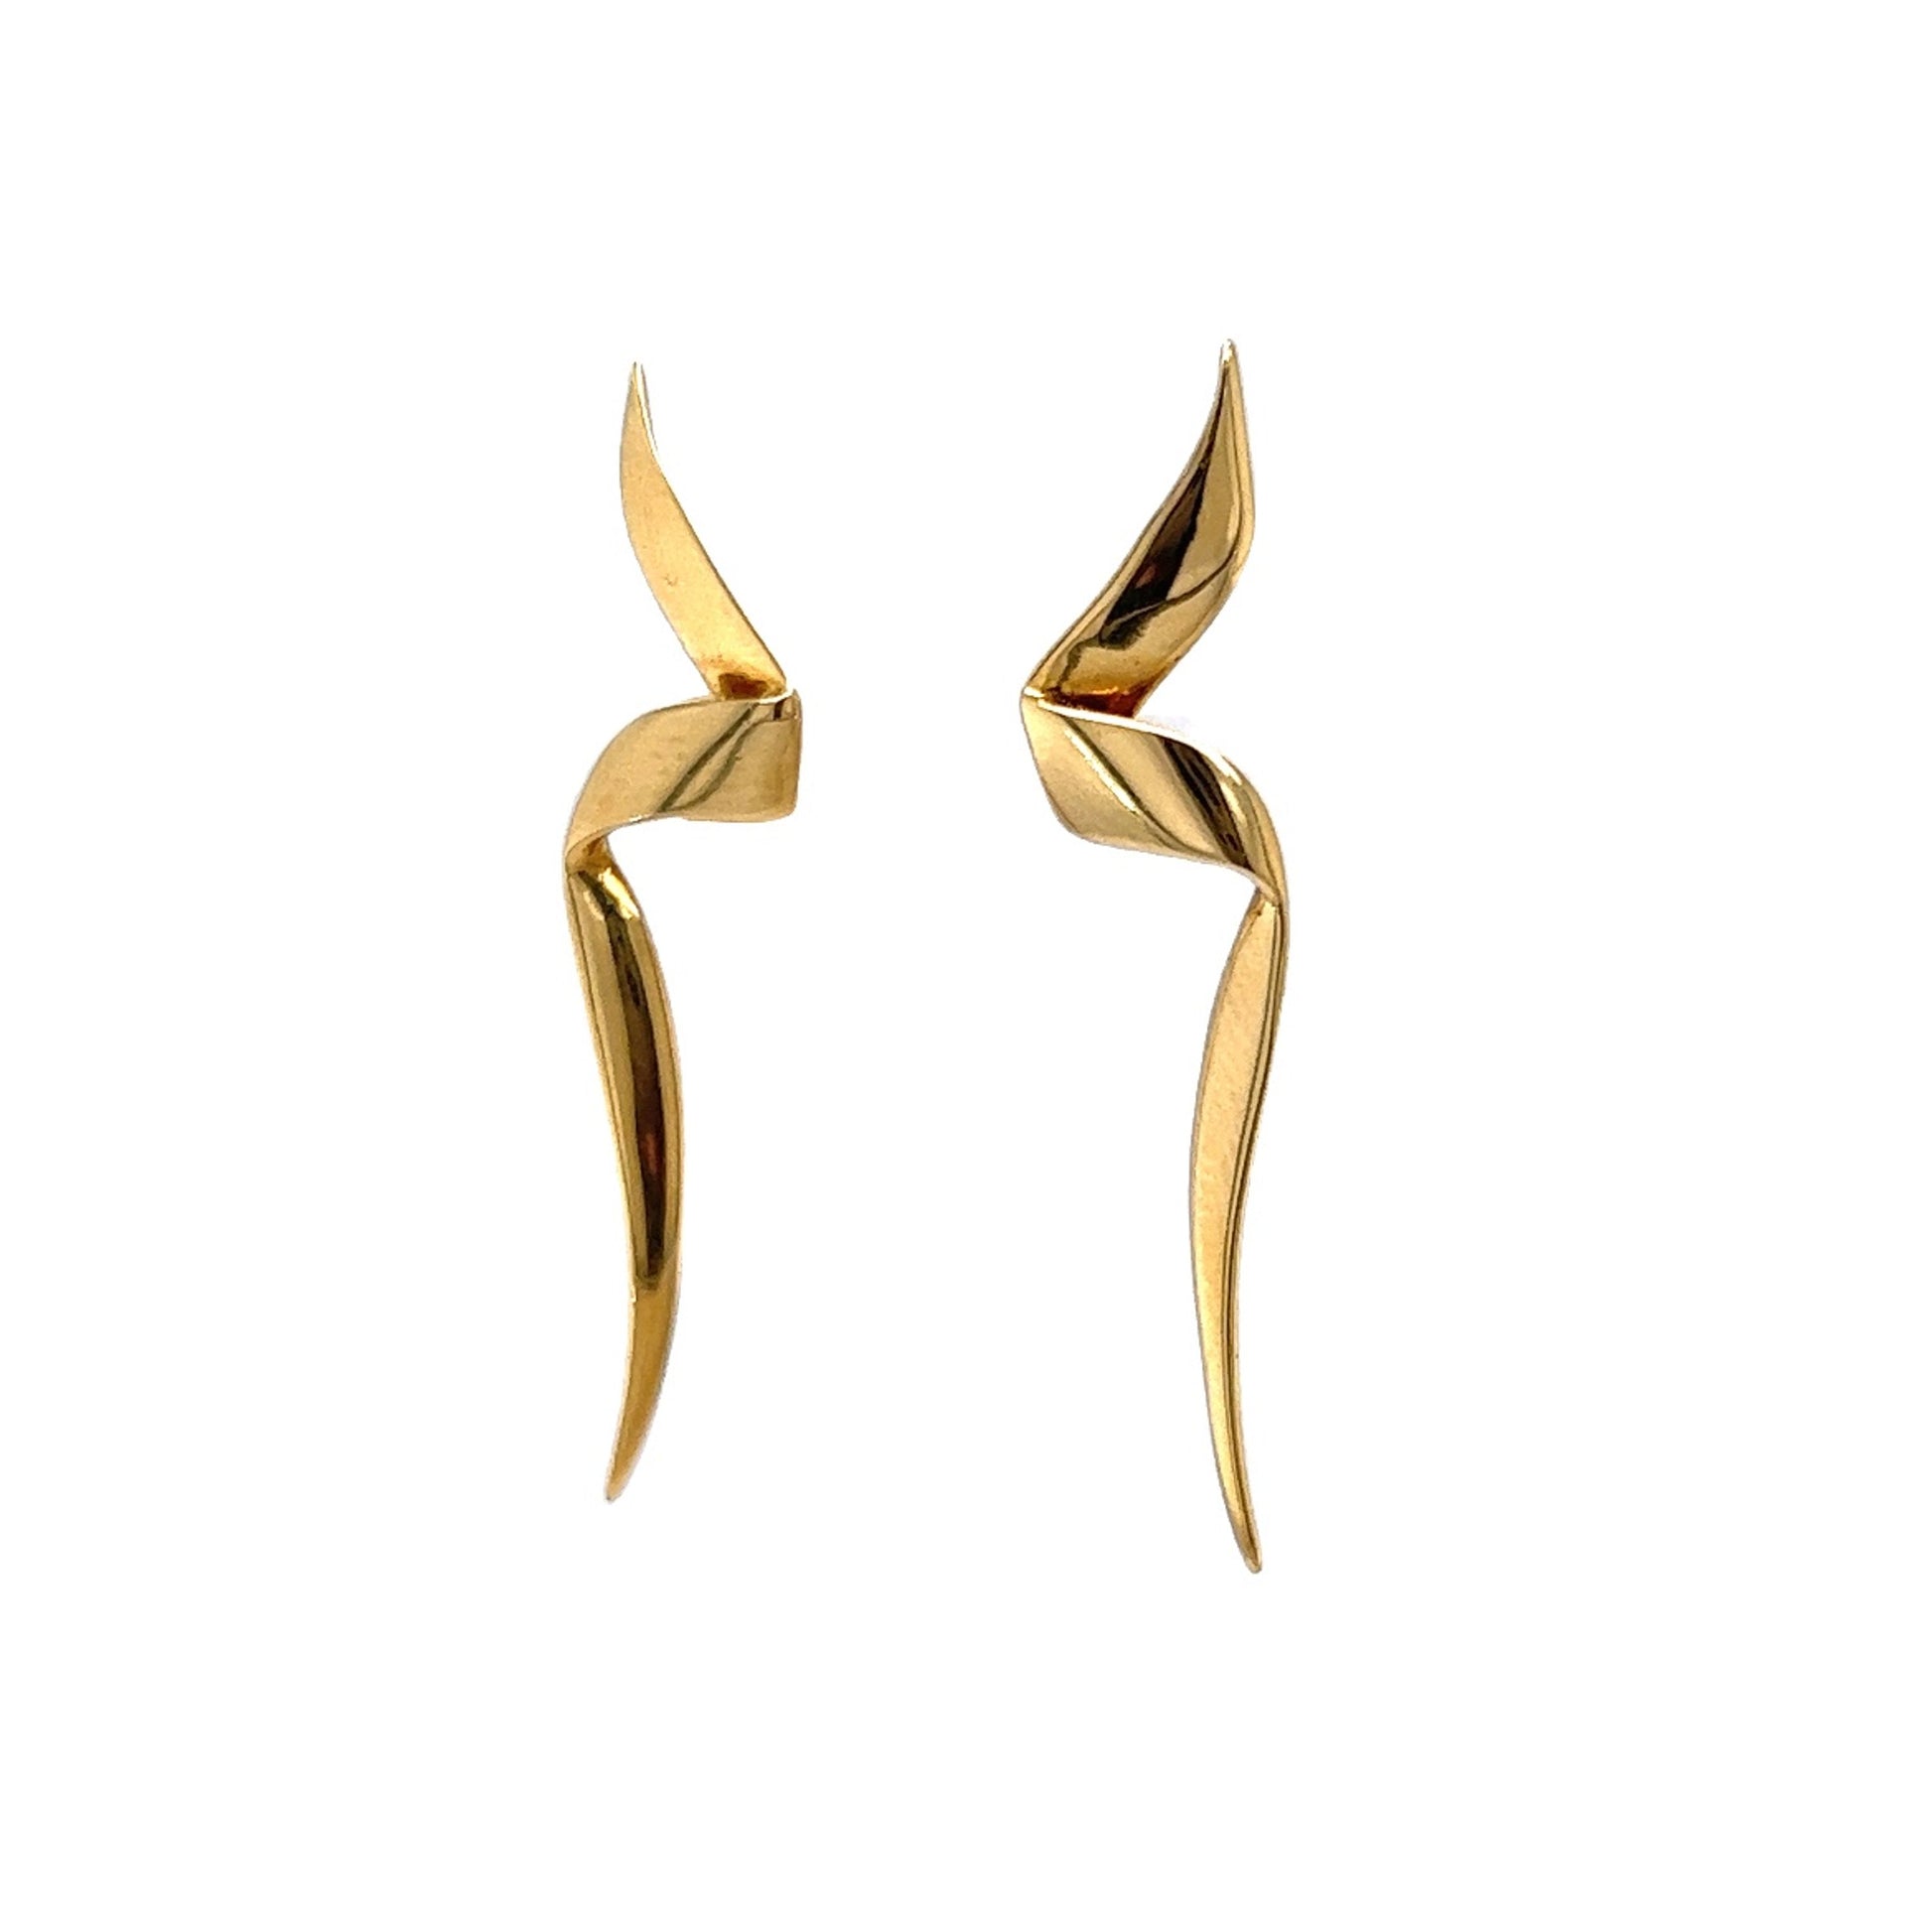 Tiffany & Co. Paloma Picasso Earrings in 18k Yellow GoldComposition: 18 Karat Yellow Gold Total Gram Weight: 2.8 g Inscription: 1993 Tiffany & Co. 18k Paloma Picasso 
      